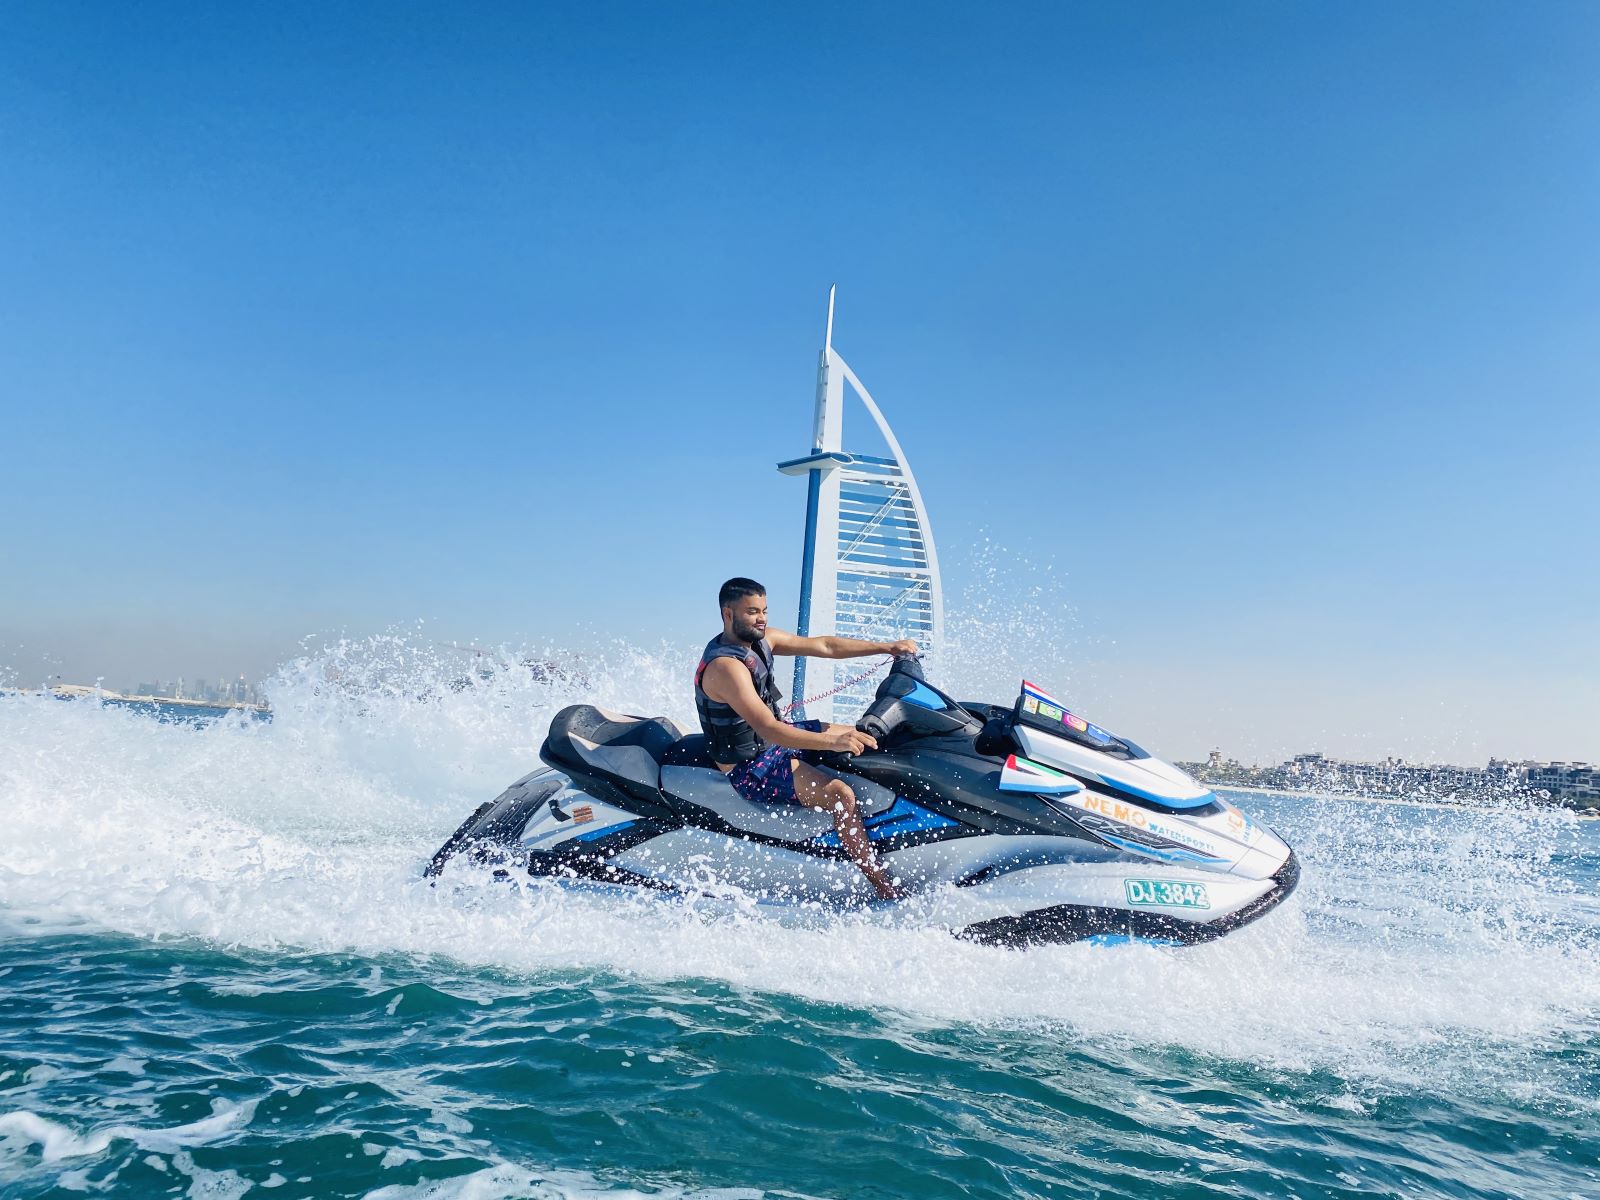 Arc Raises $70M In Funding To Expand Into The Watersports Market